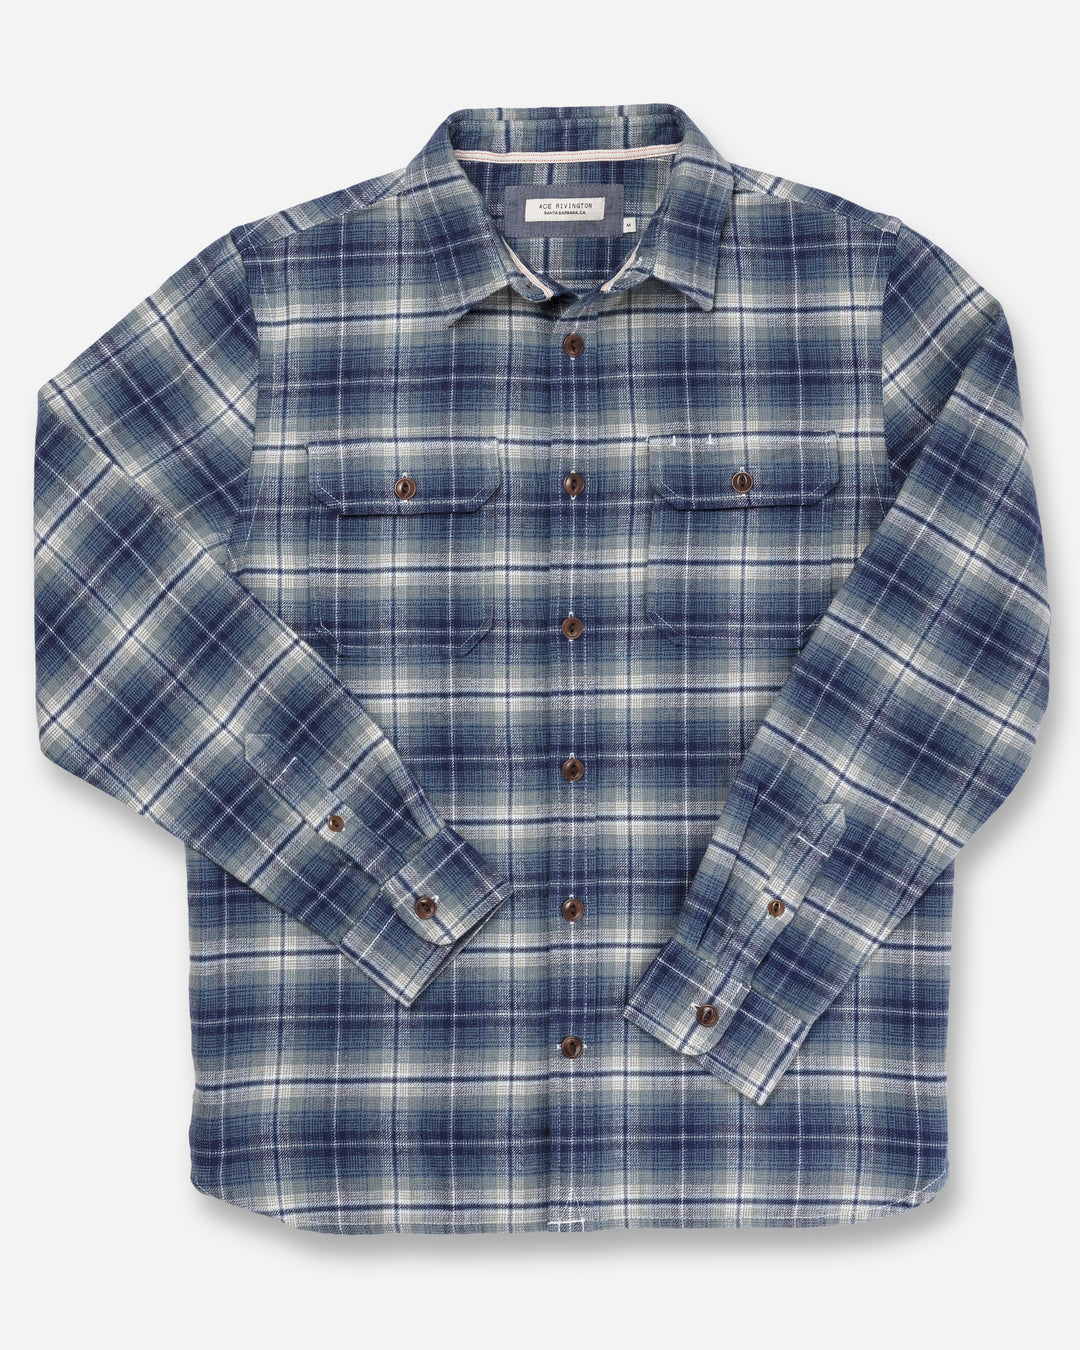 front of men's off white and light blue plaid pattern flannel with brown buttons and white collar stripe and overlaid arms in standard height option